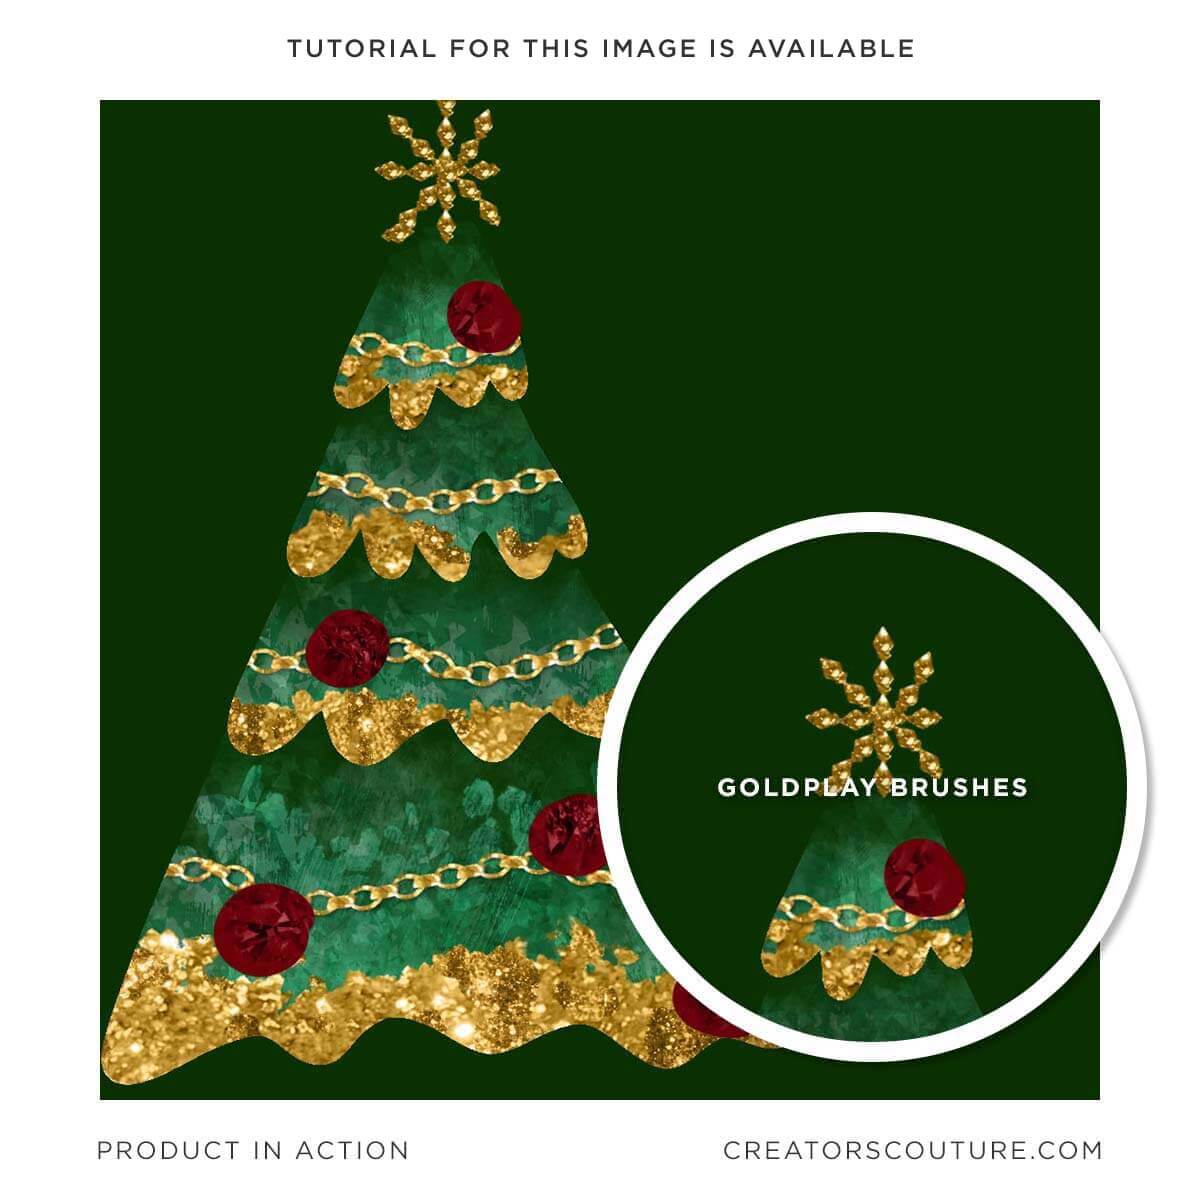 jewel Christmas tree illustration with metallic gold accents created with Photoshop brushes